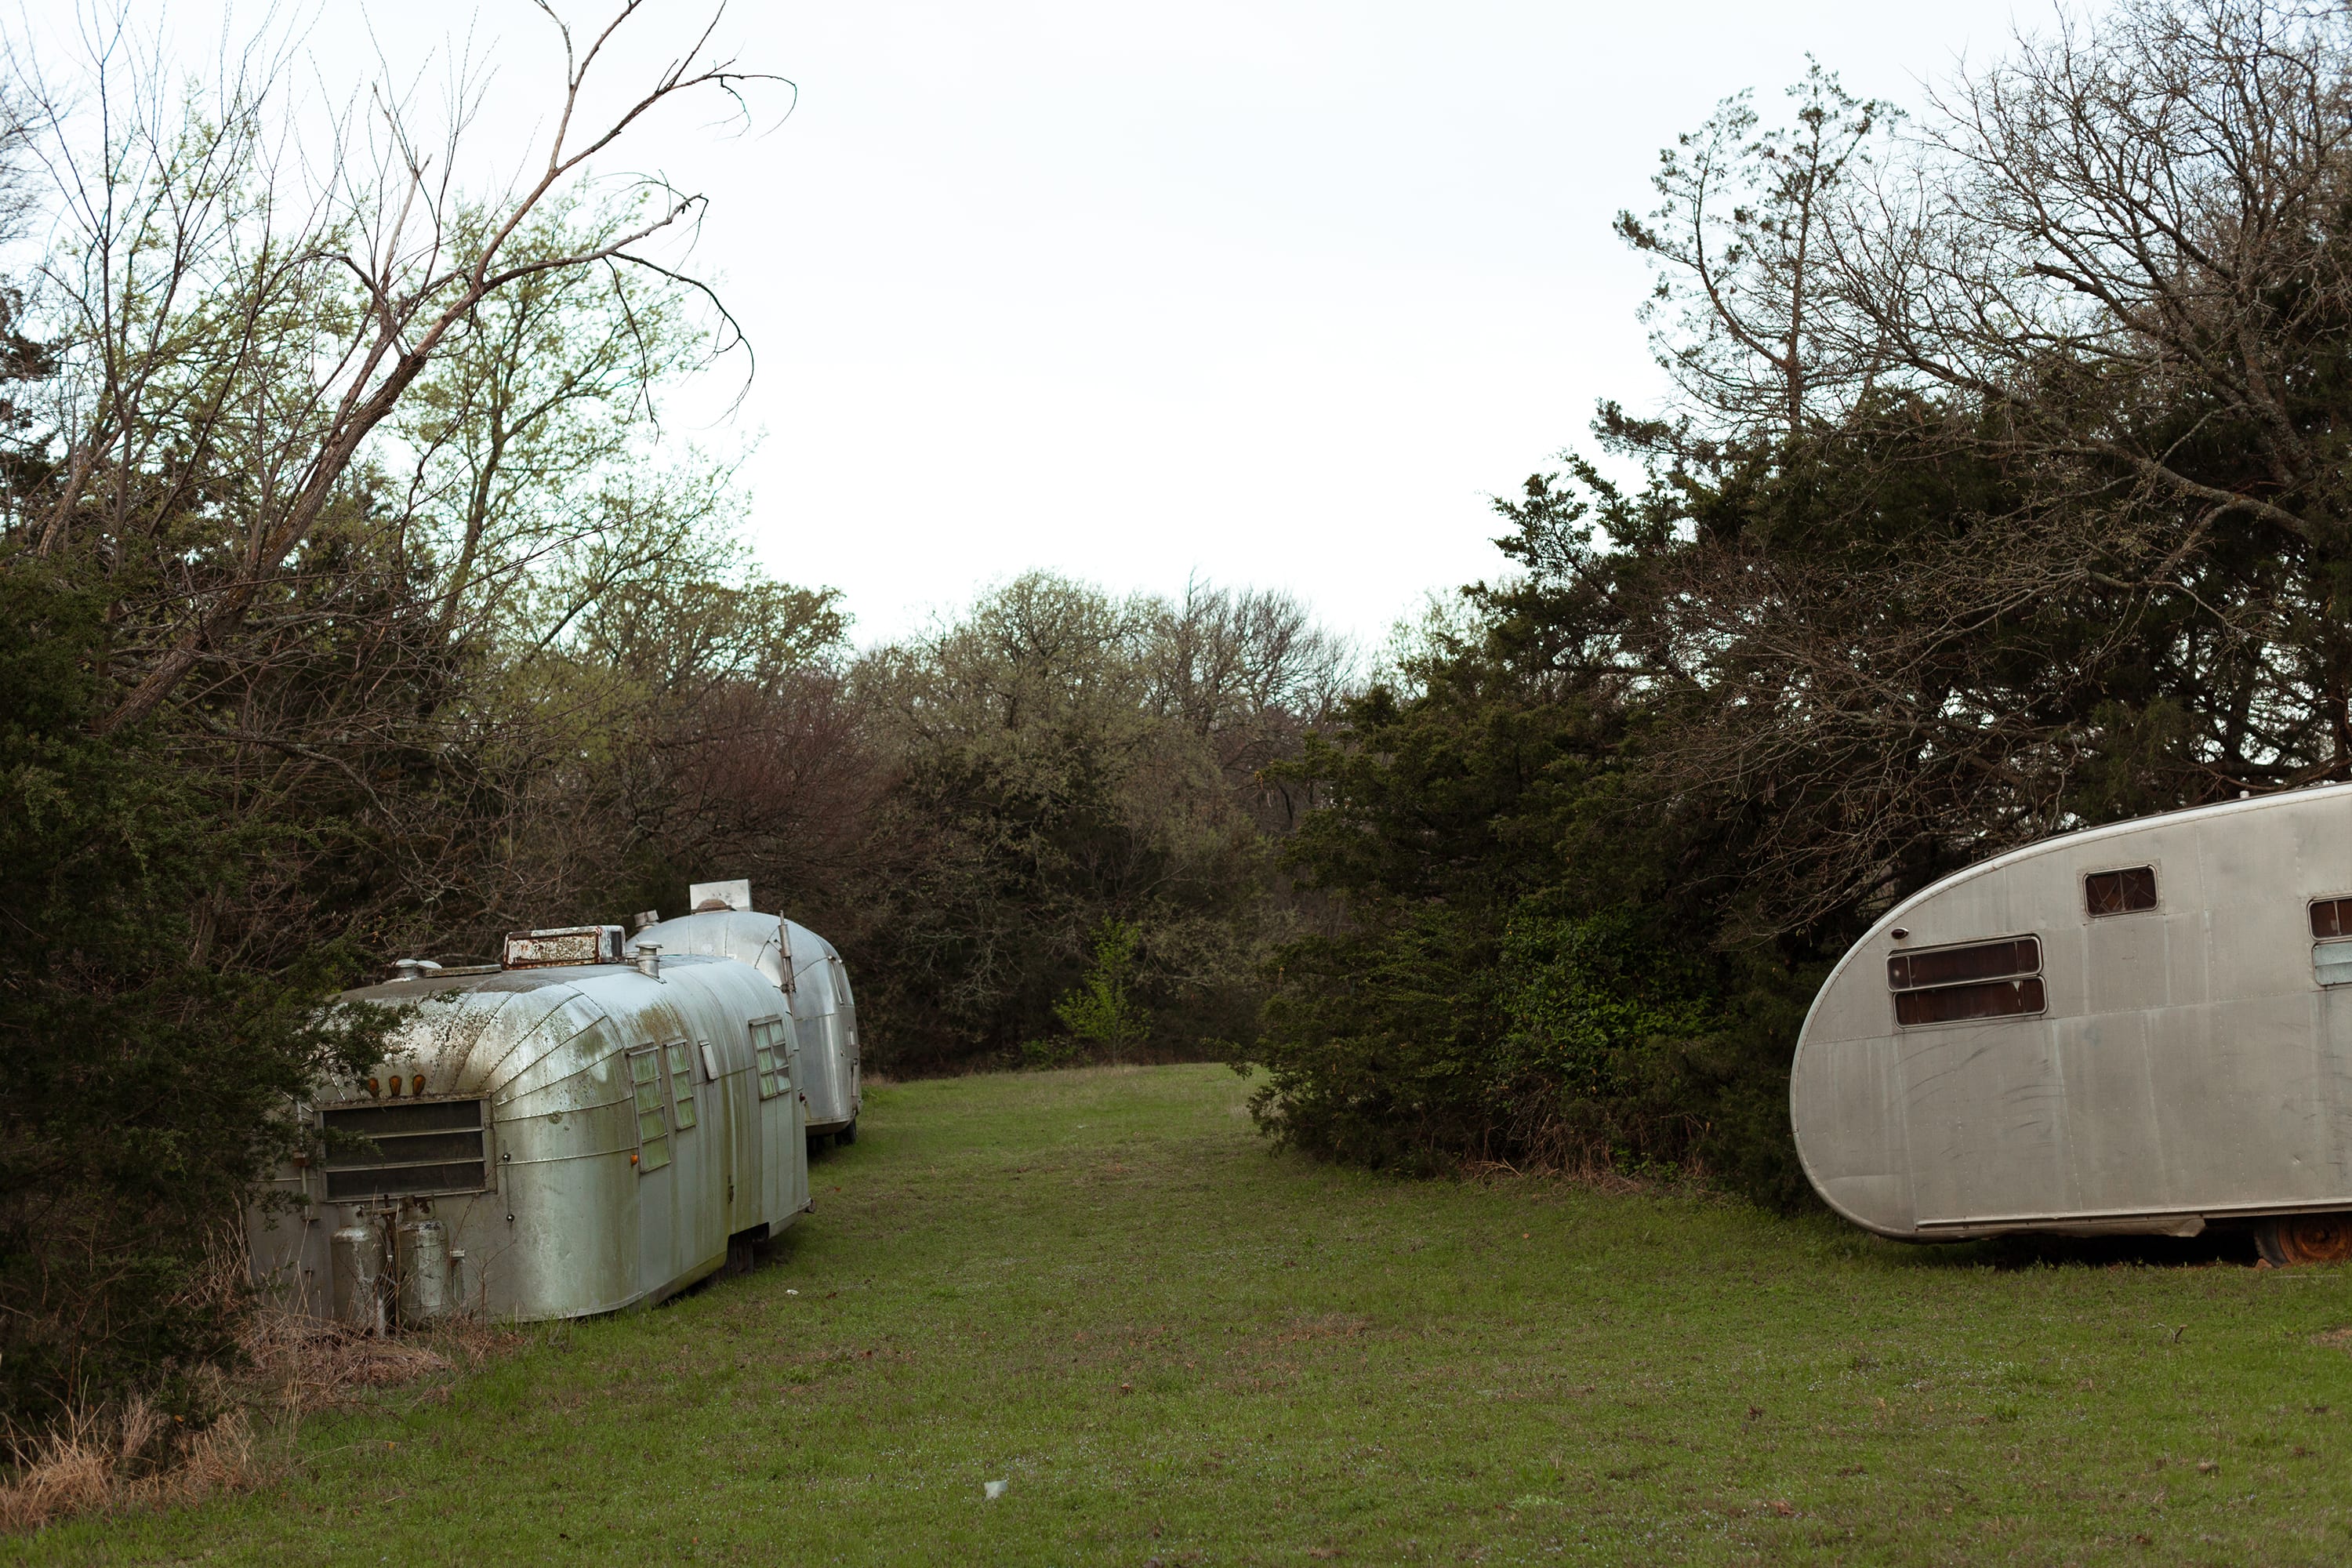 More airstreams on the property